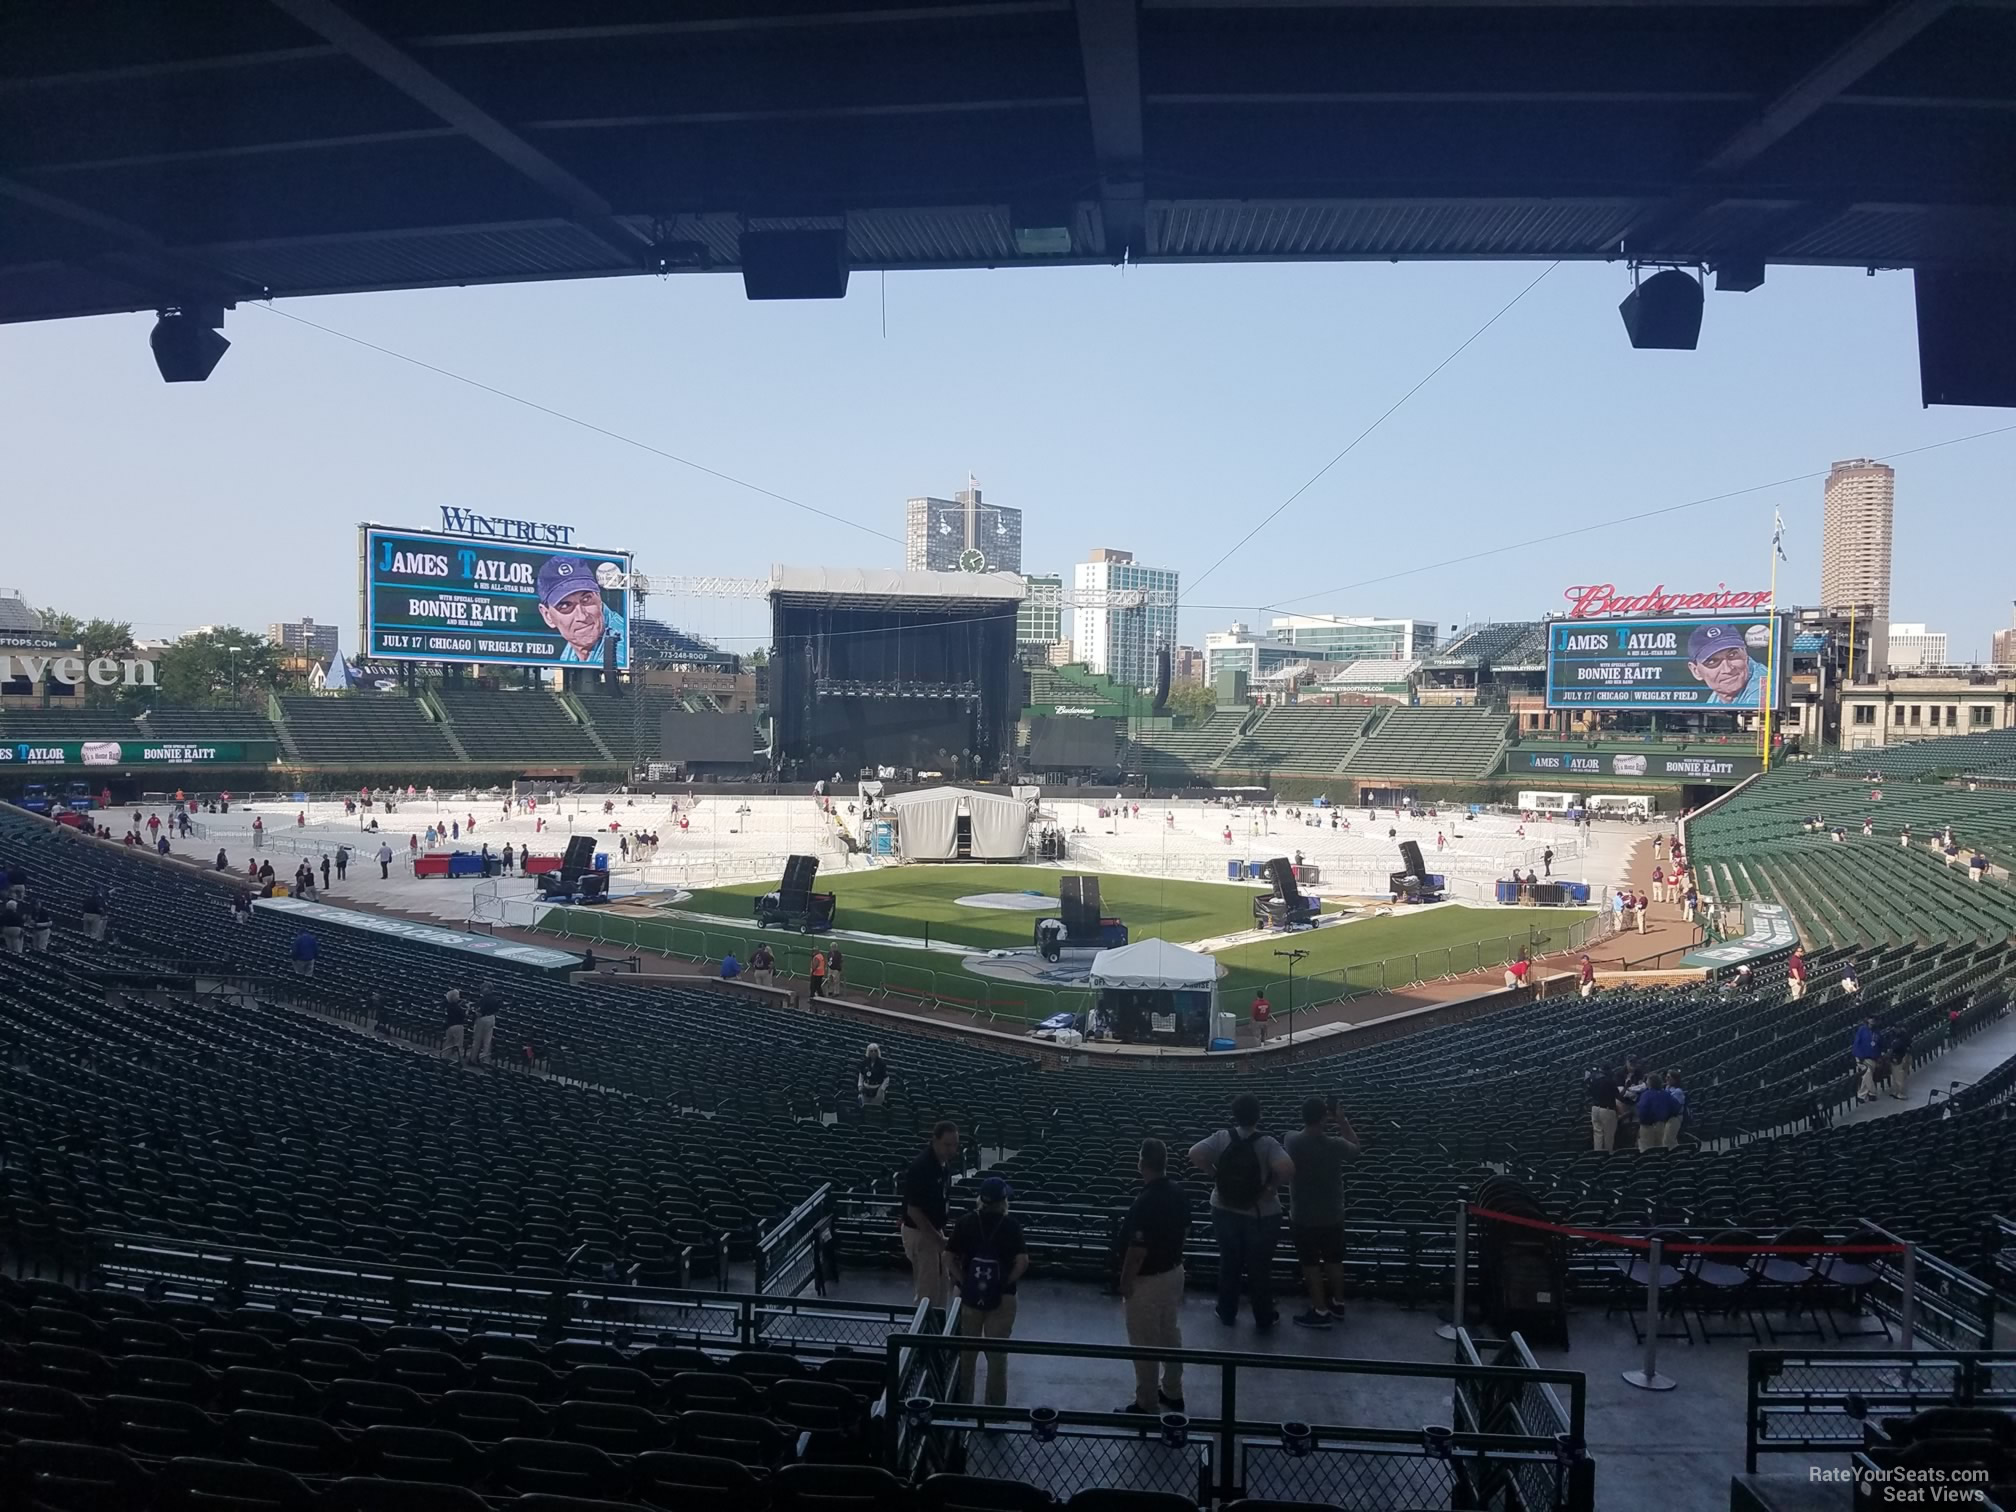 Section 216 at Wrigley Field for Concerts